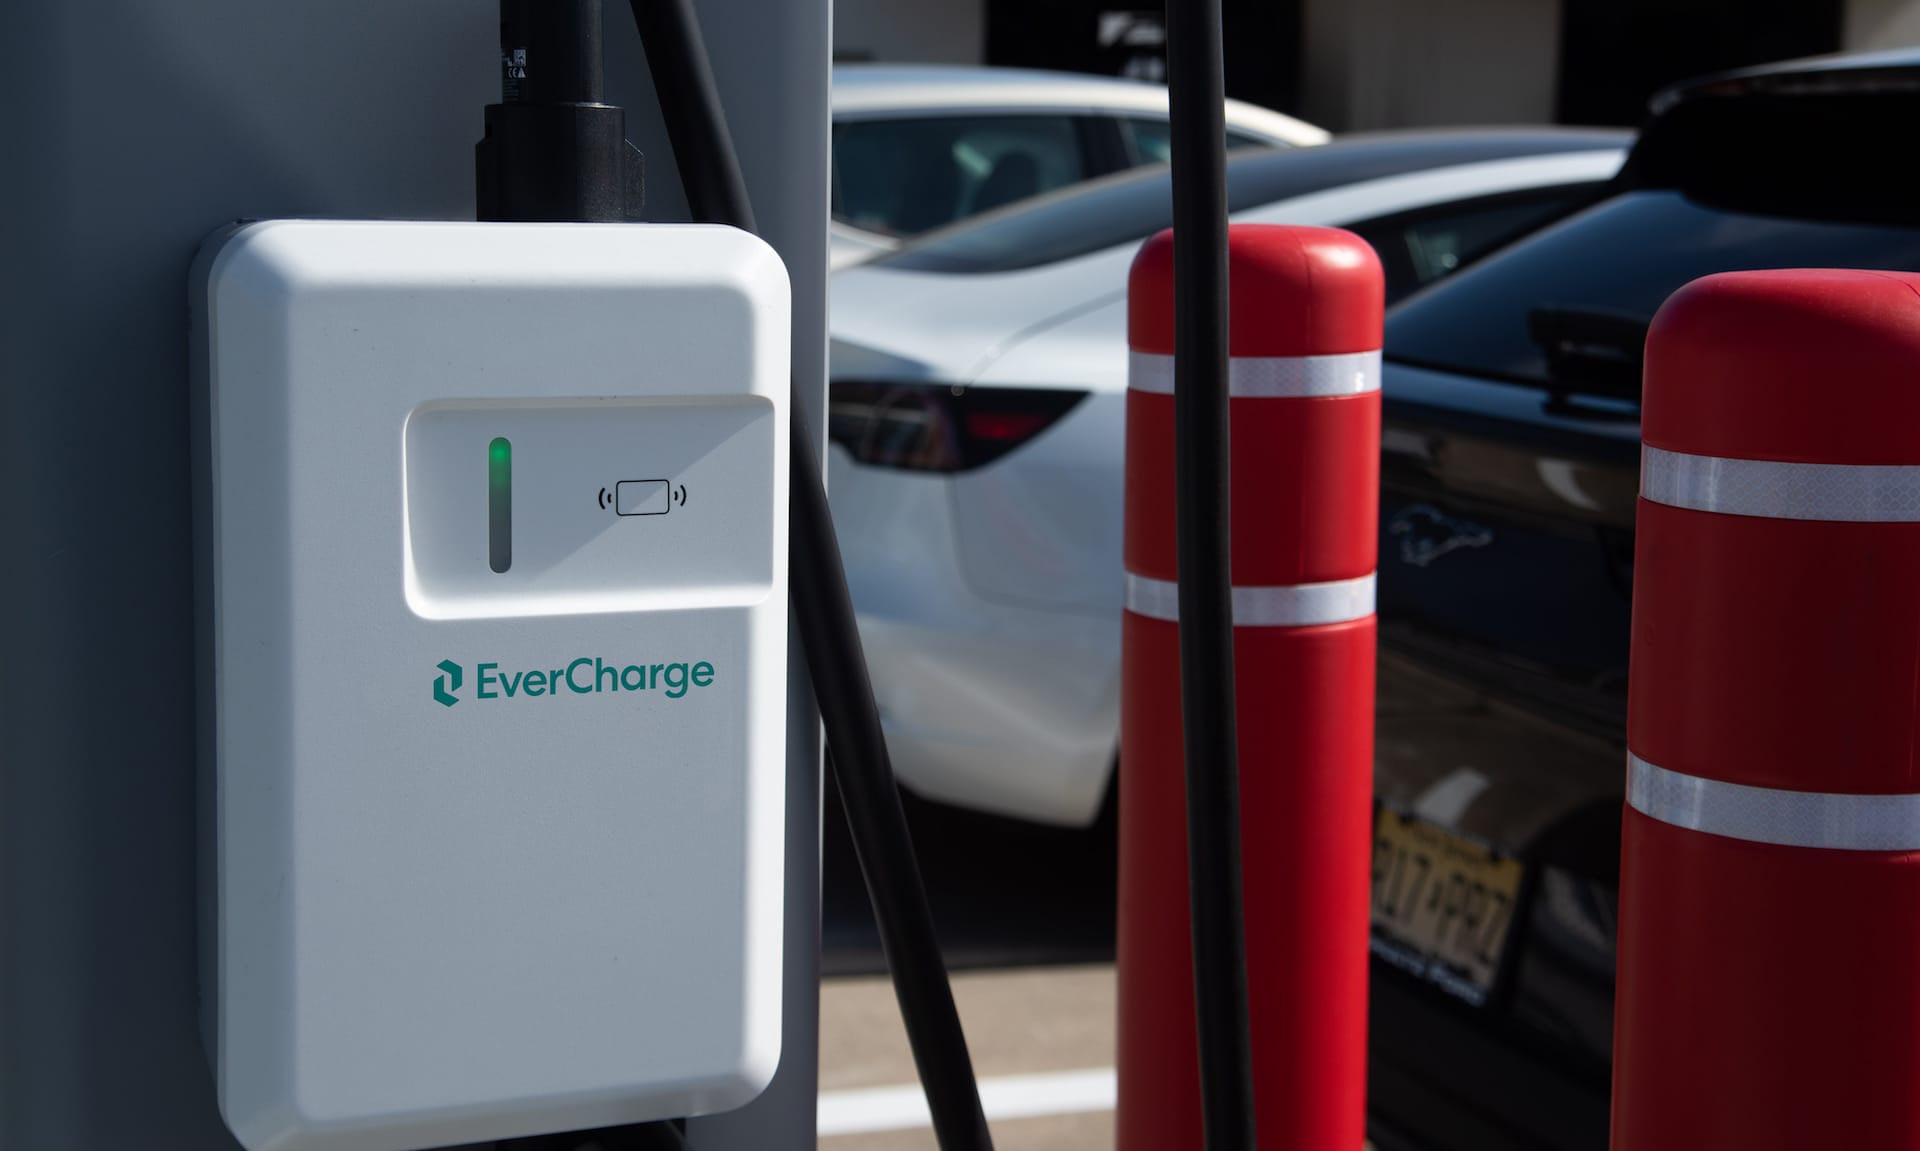 Avis Budget Group and EverCharge Partner to Launch LargeScale EV